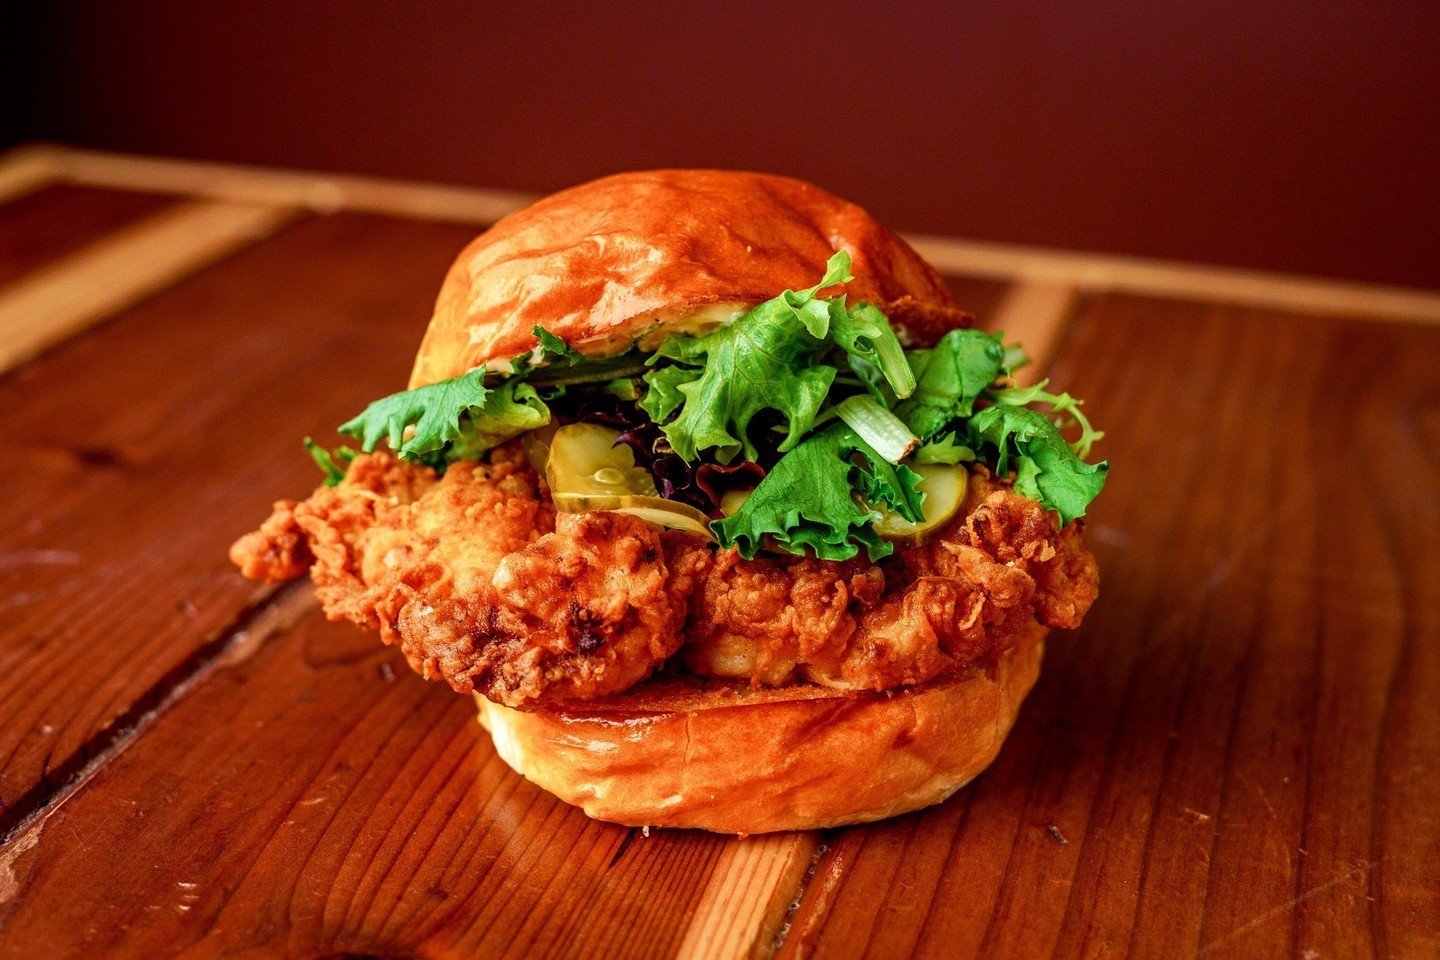 A classic chicken sandwich. You can get this pulled too, but there is just something about fried...